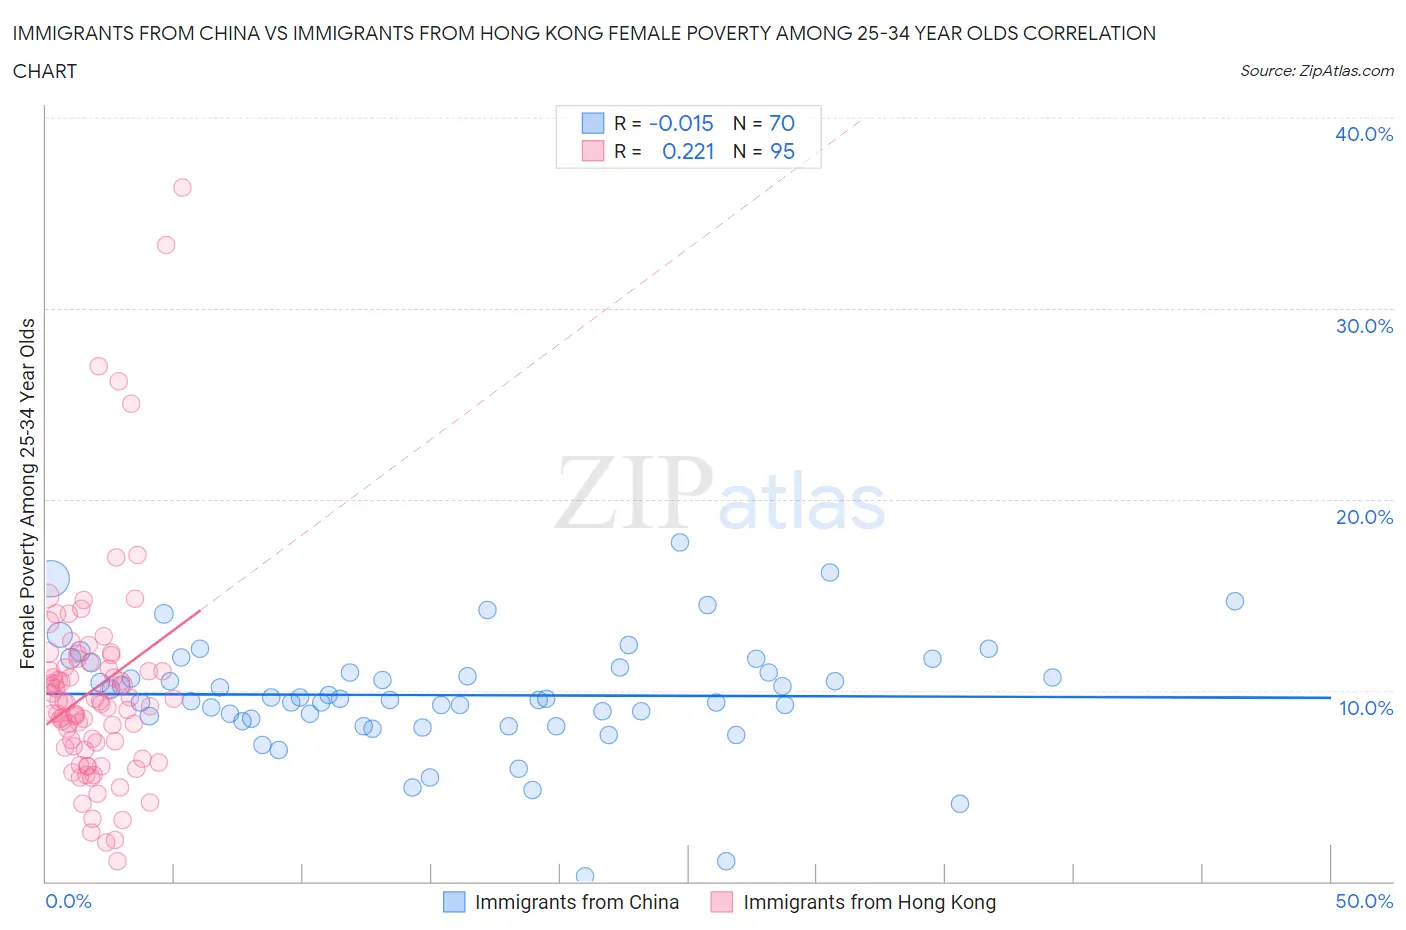 Immigrants from China vs Immigrants from Hong Kong Female Poverty Among 25-34 Year Olds